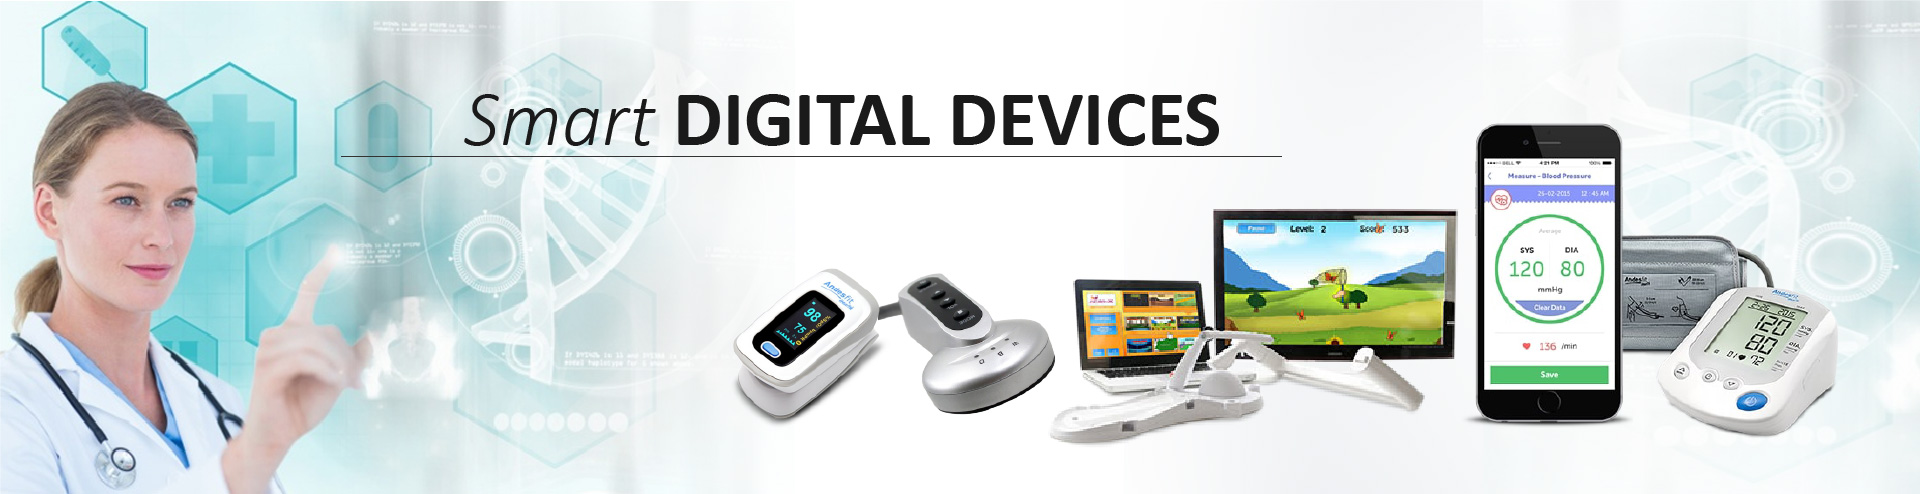 Digital devices